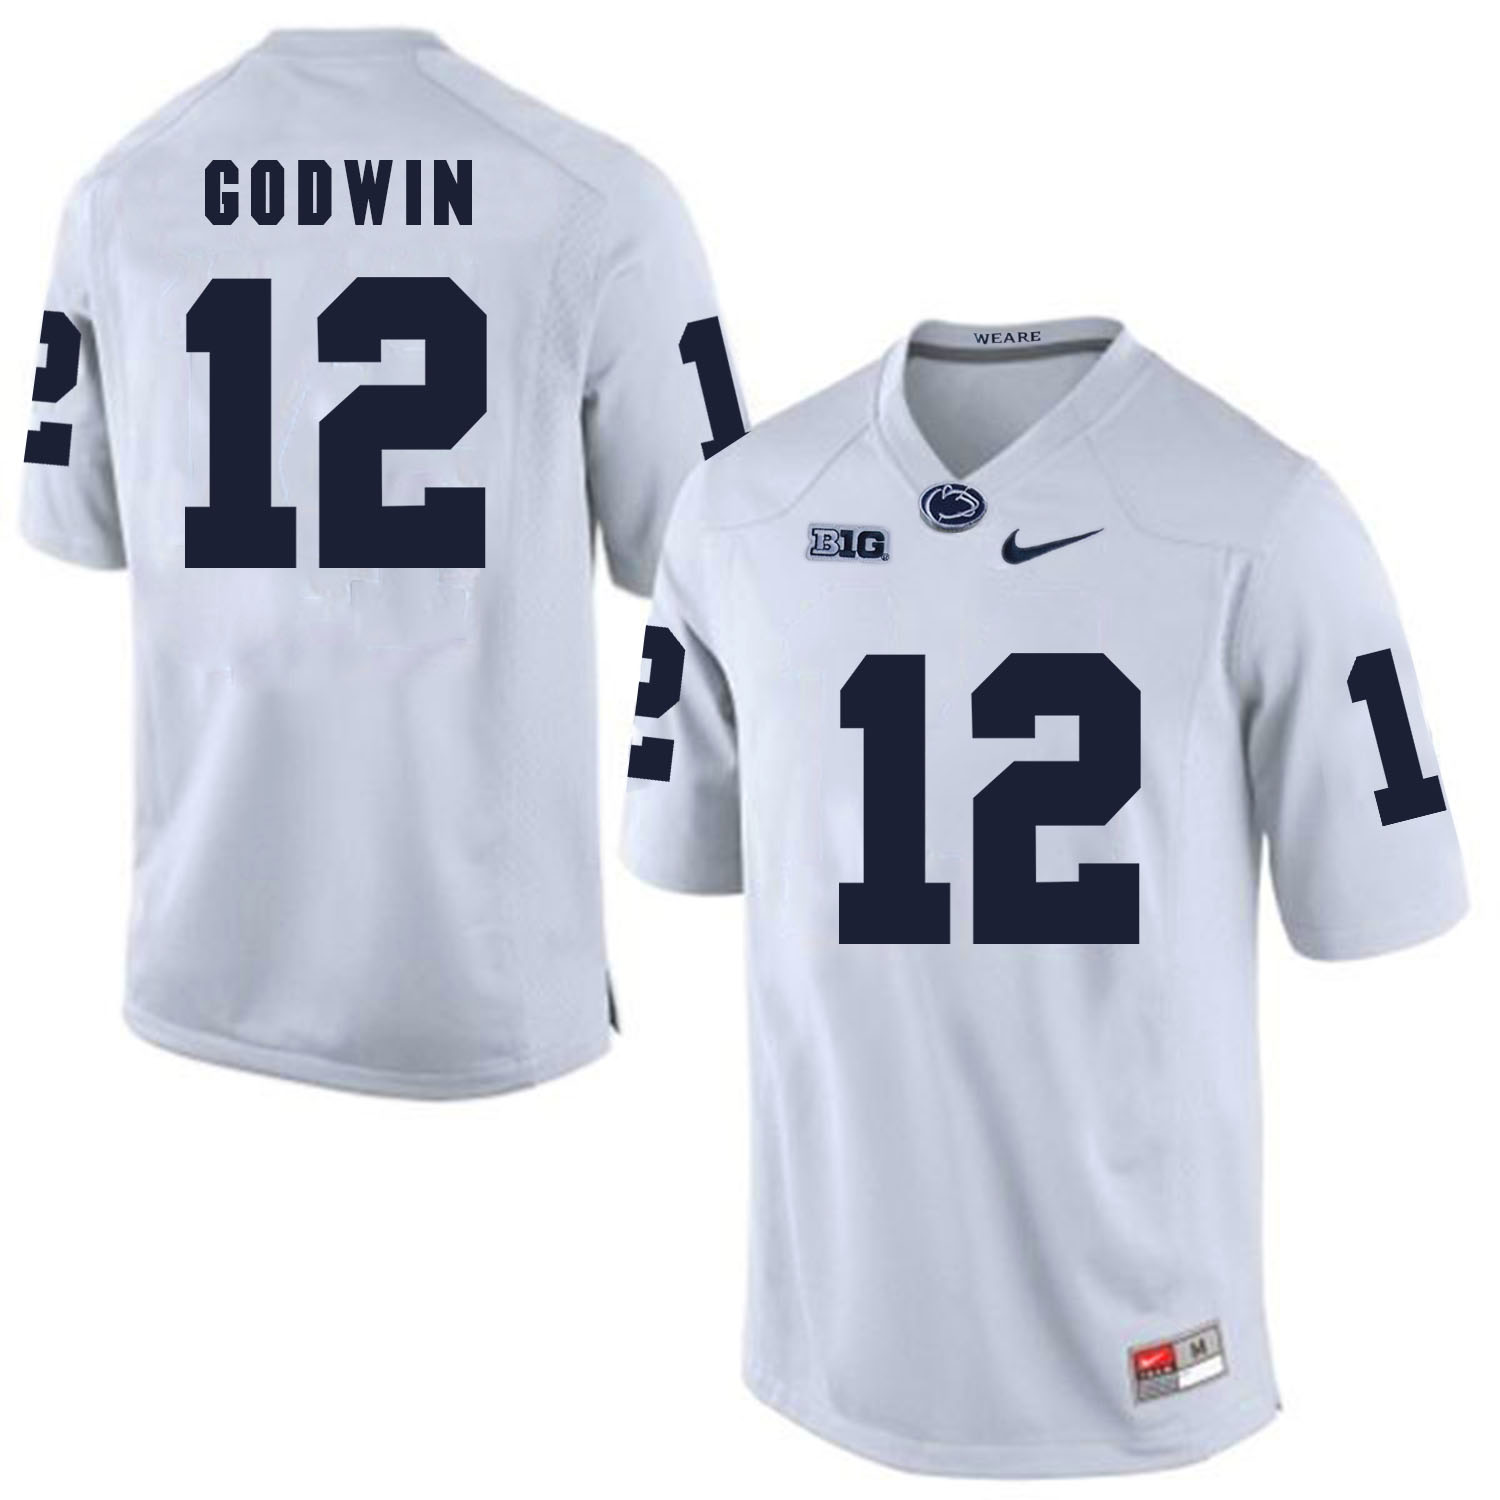 Penn State Nittany Lions 12 Chris Godwin White College Football Jersey